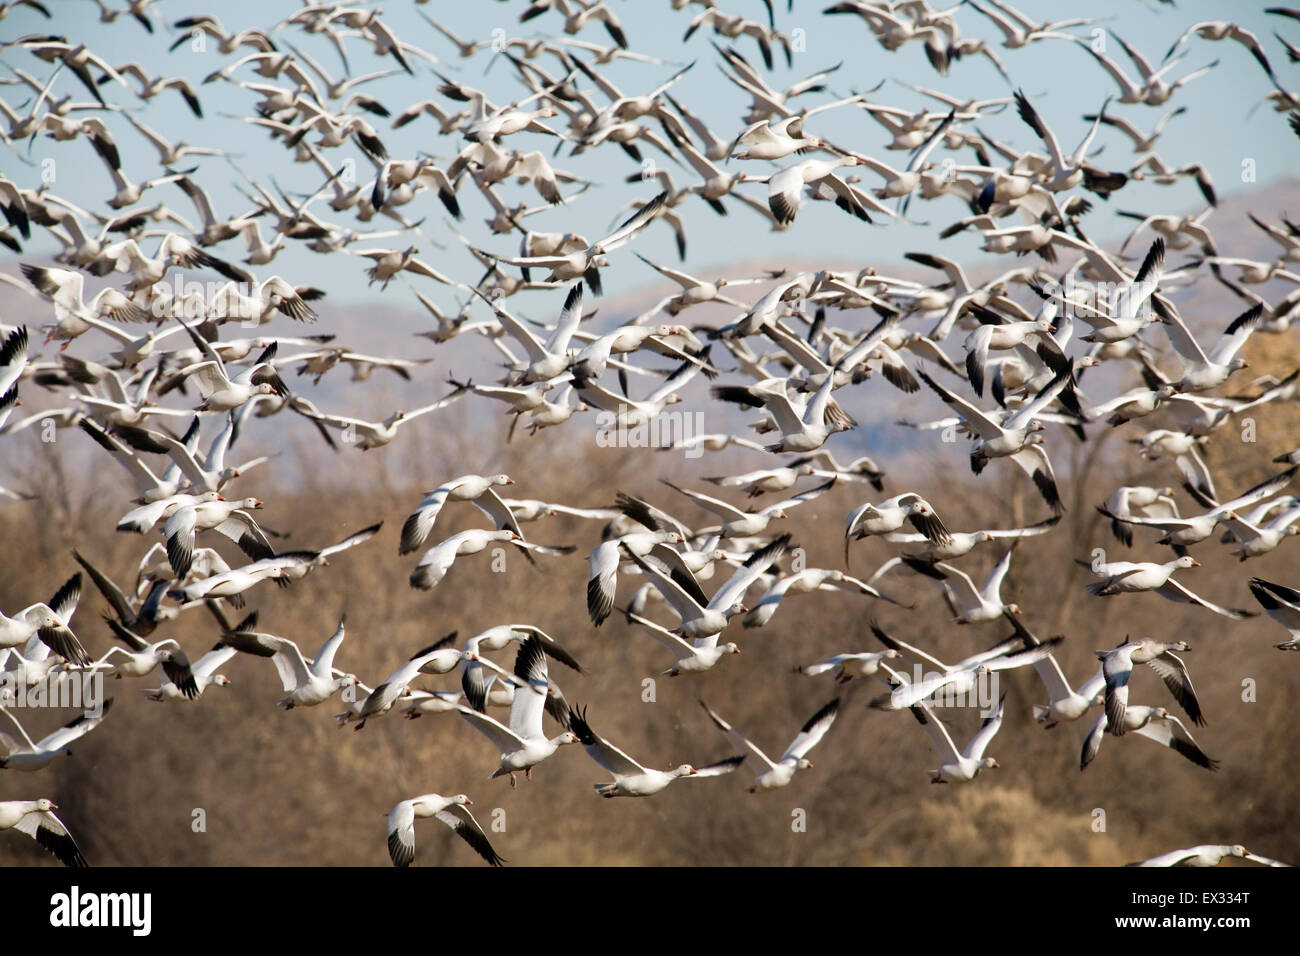 Thousands of snow geese erupt into flight, wing-to-wing, flapping and squawking, from the feeding fields at Bosque del Apache. Stock Photo